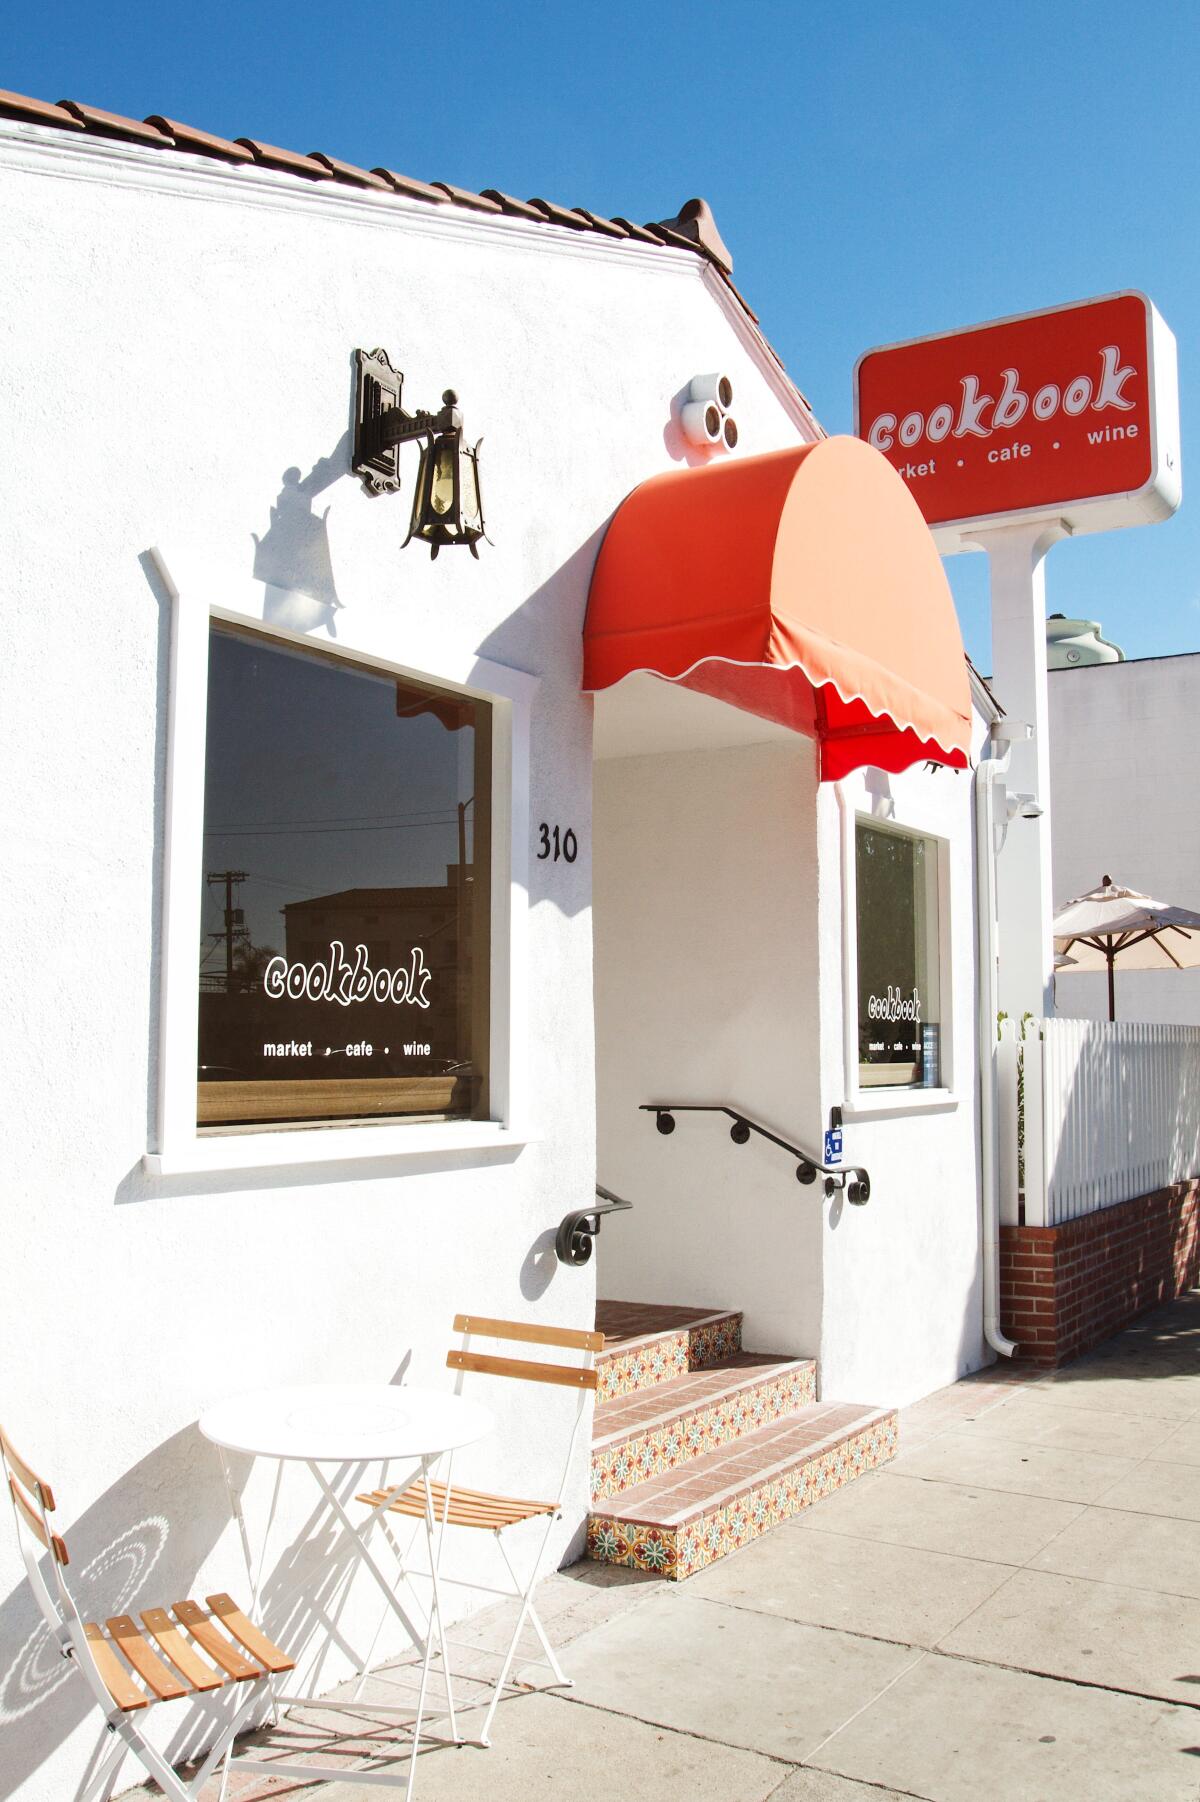 An exterior of the all-white Cookbook Market in Larchmont with orange signage and awning.